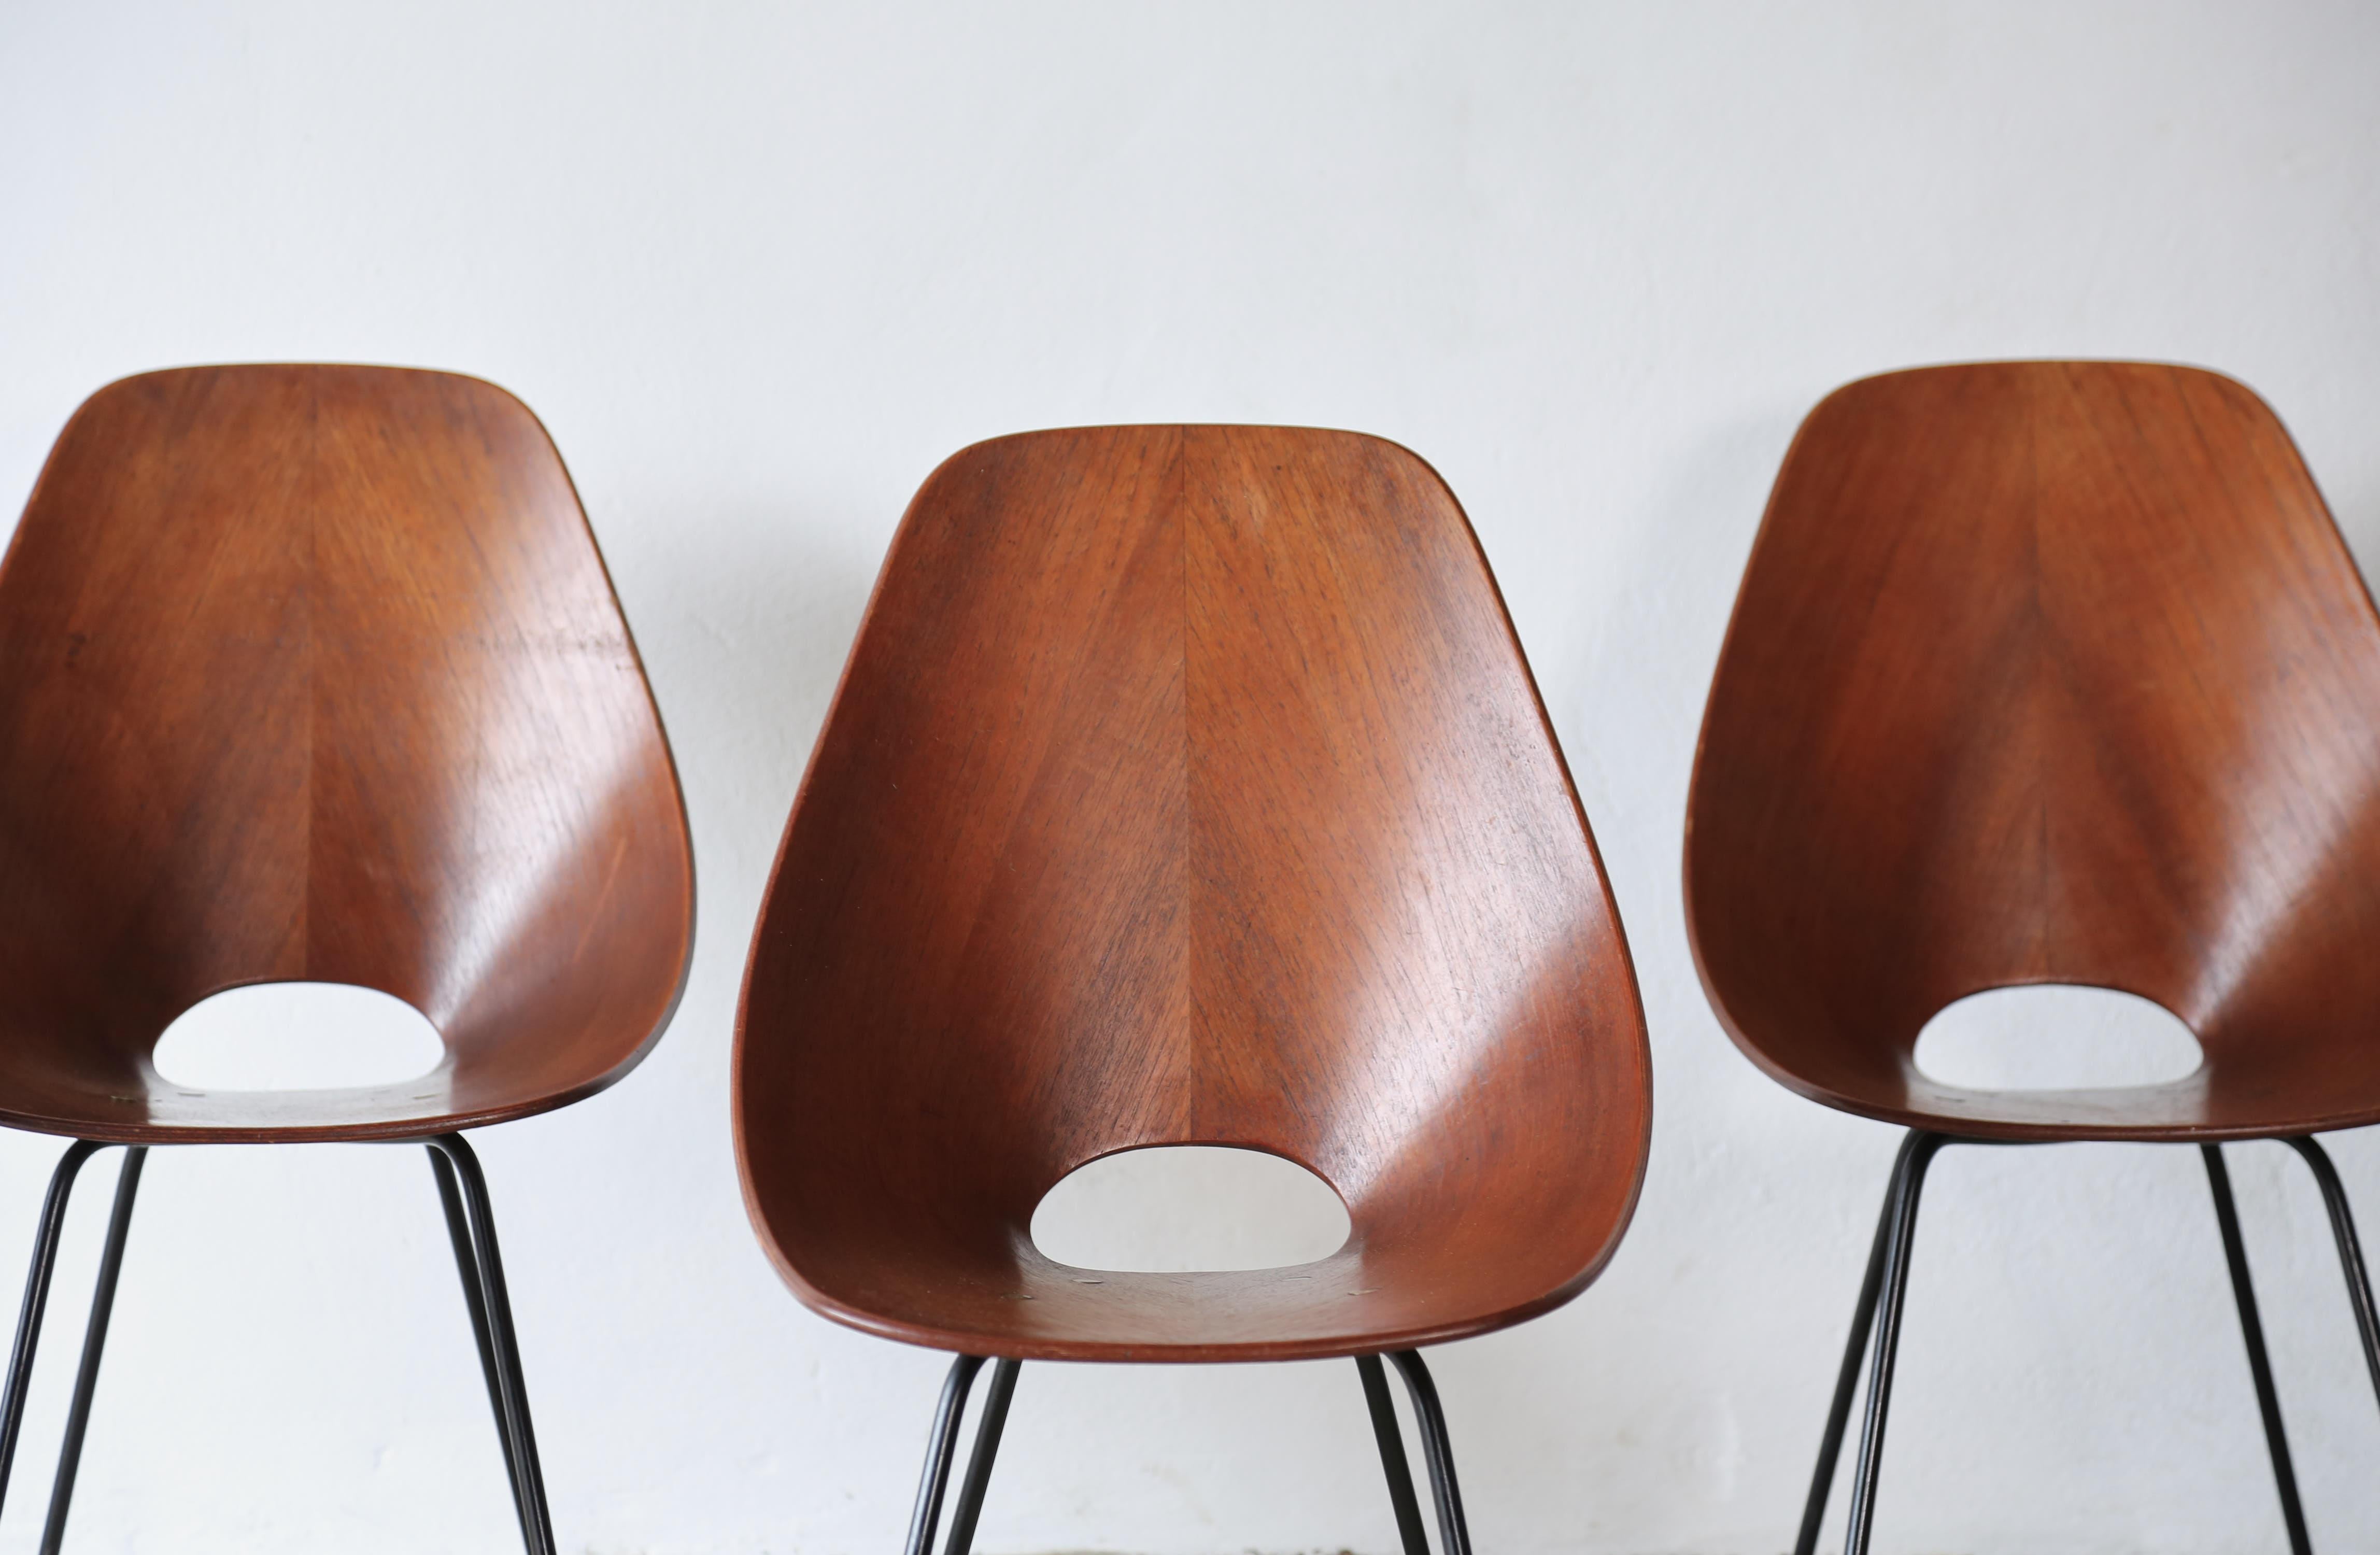 20th Century Set of 6 Medea Chairs by Vittorio Nobili, Fratelli Tagliabue, Italy, 1950s For Sale